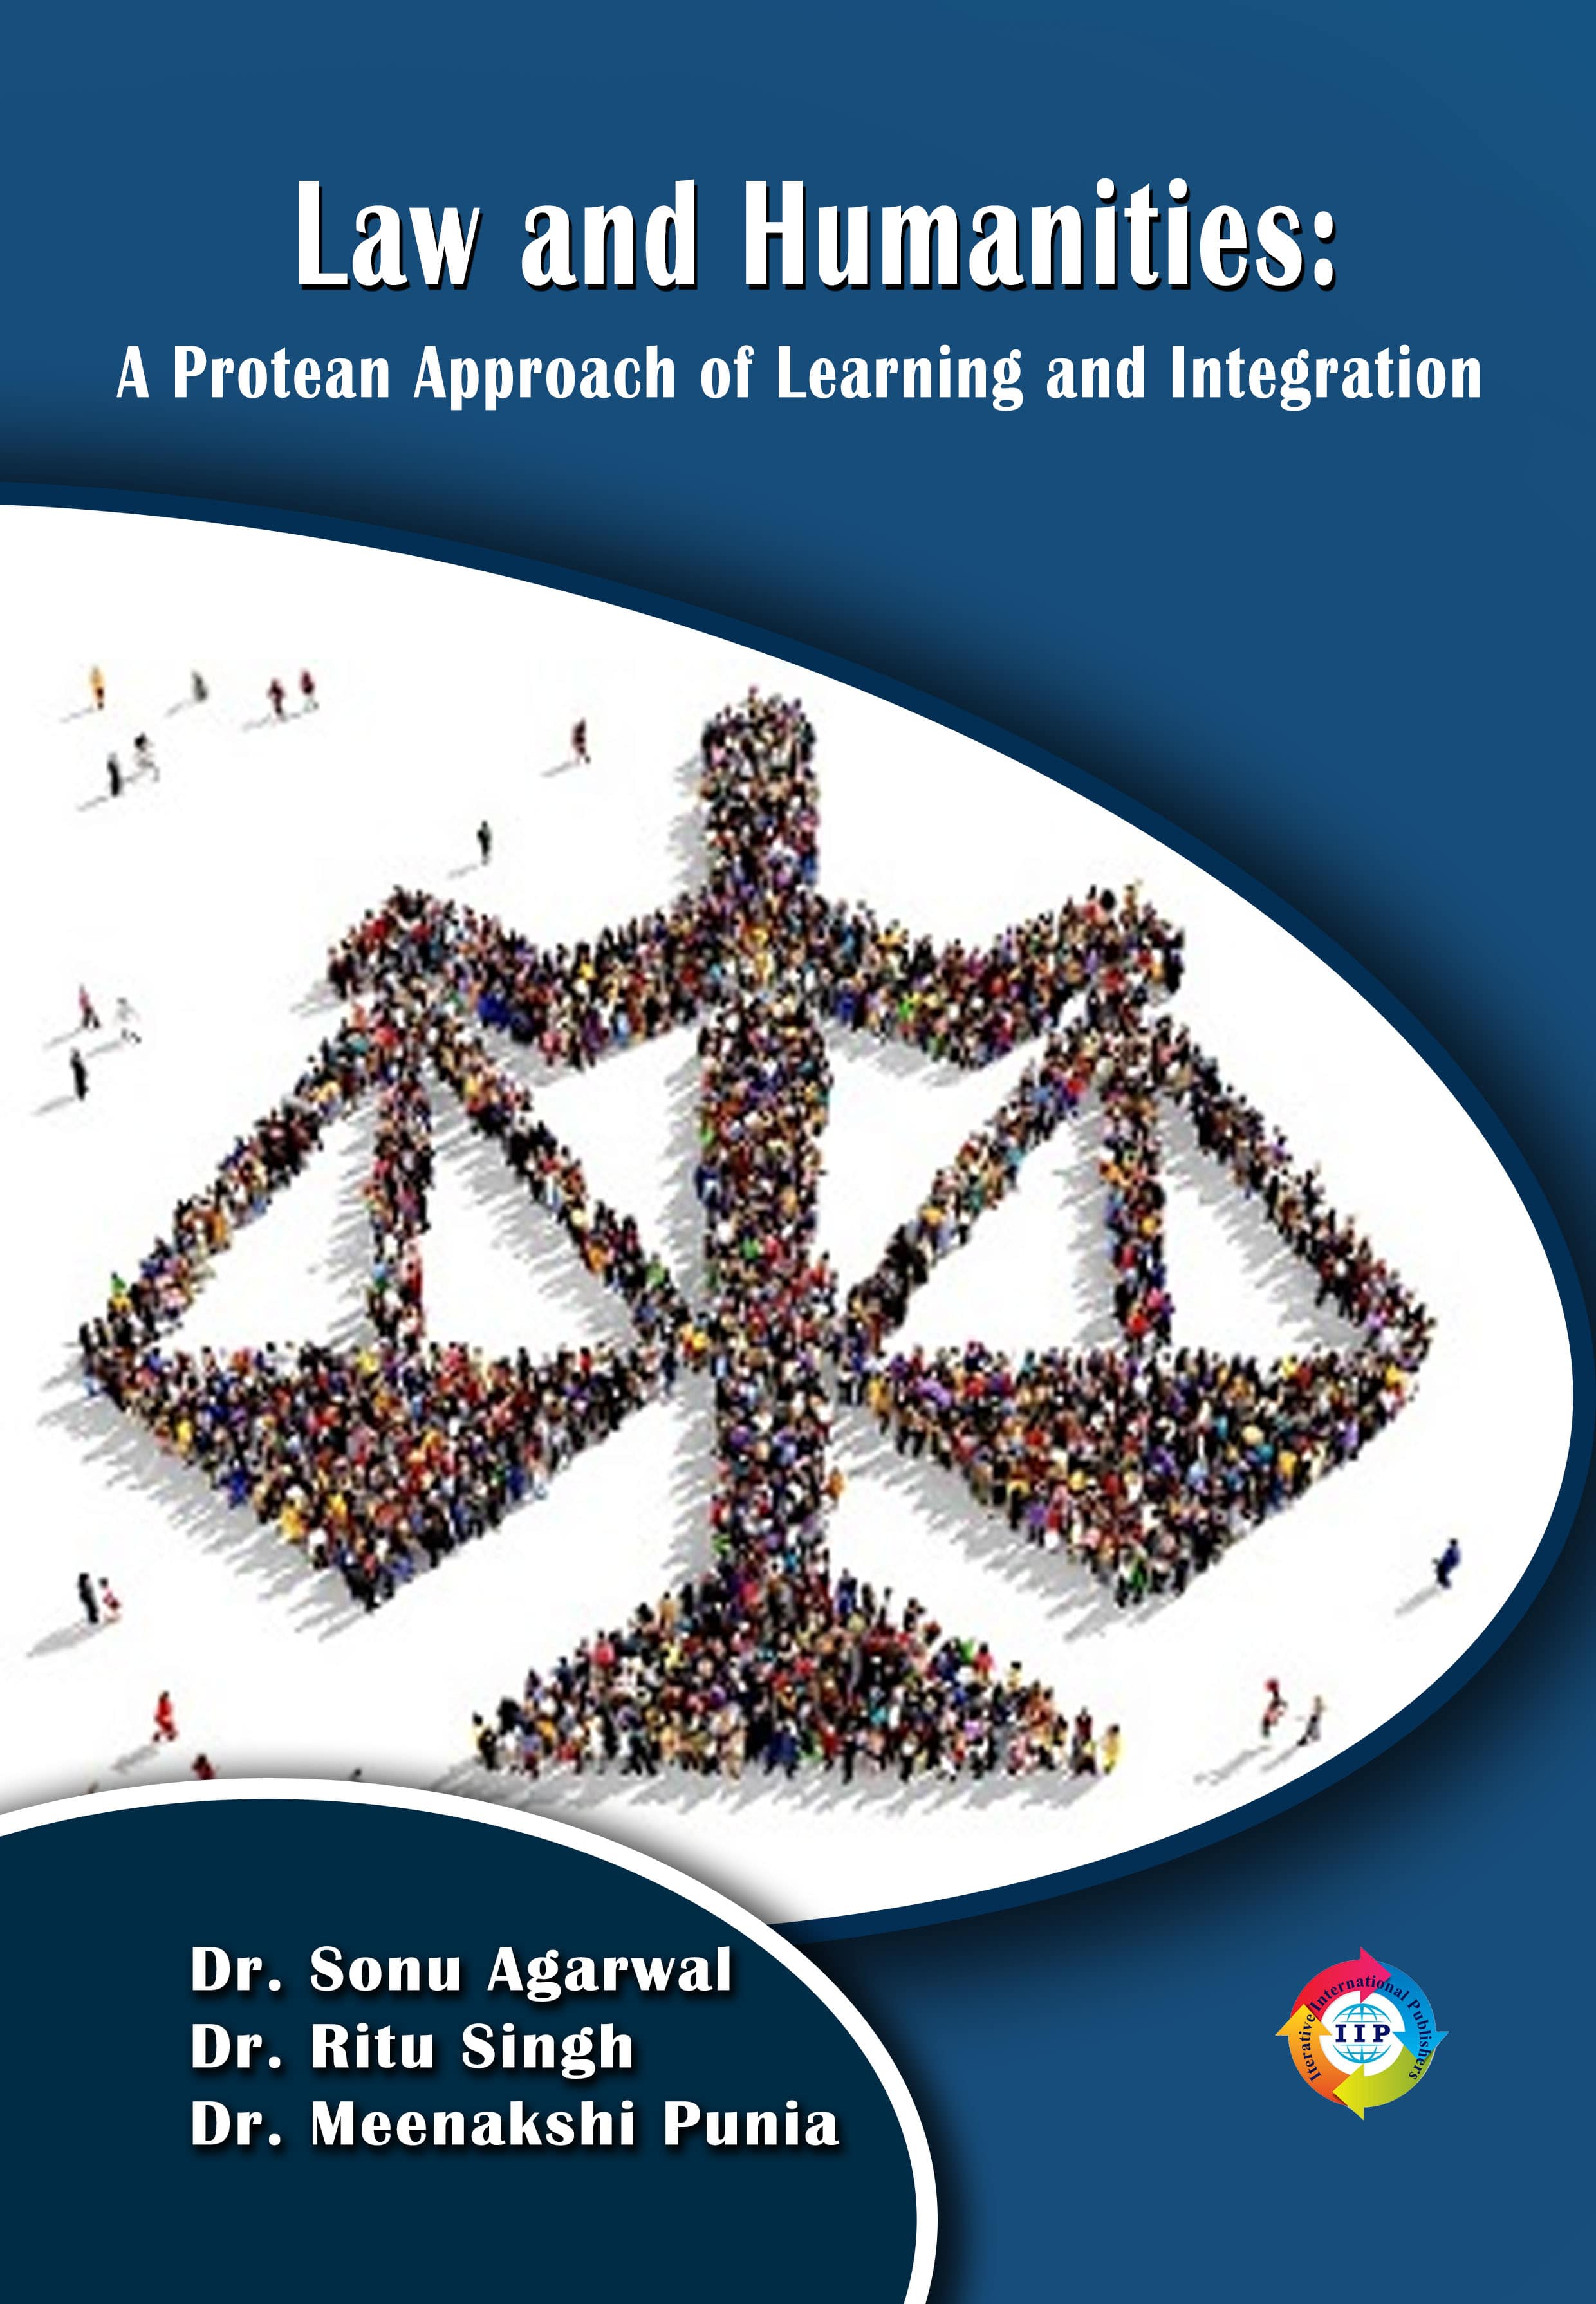 LAW AND HUMANITIES: A PROTEAN APPROACH OF LEARNING AND INTEGRATION